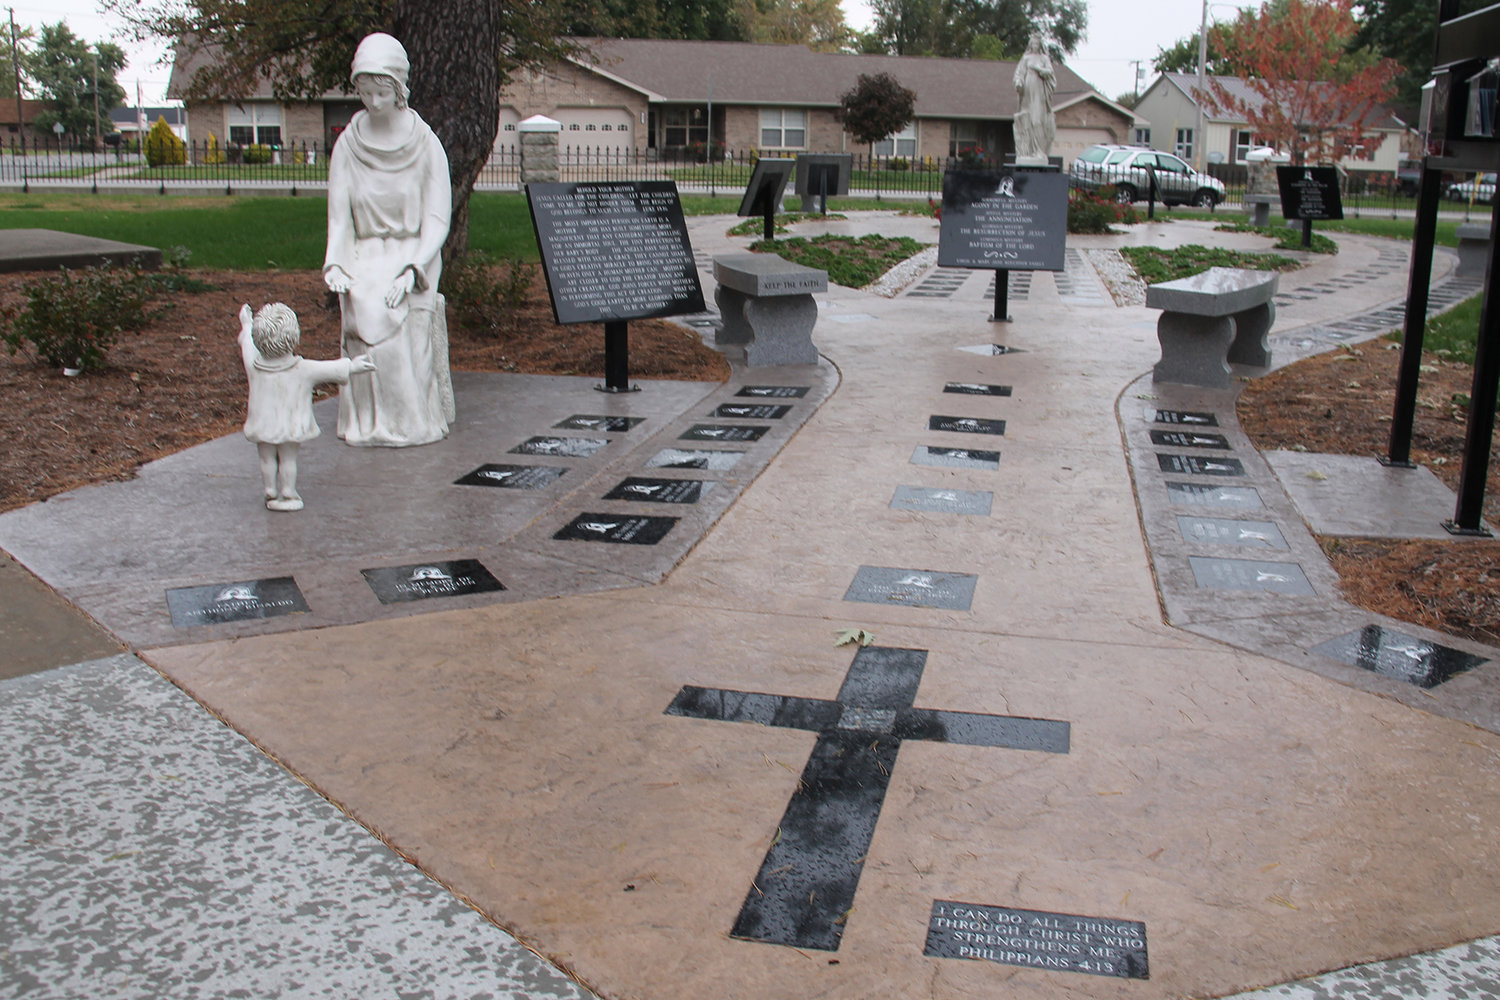 The Rosary Garden outside St. Andrew Church in Tipton includes a paved walkway with embedded stones representing each bead, and information about praying the Rosary.